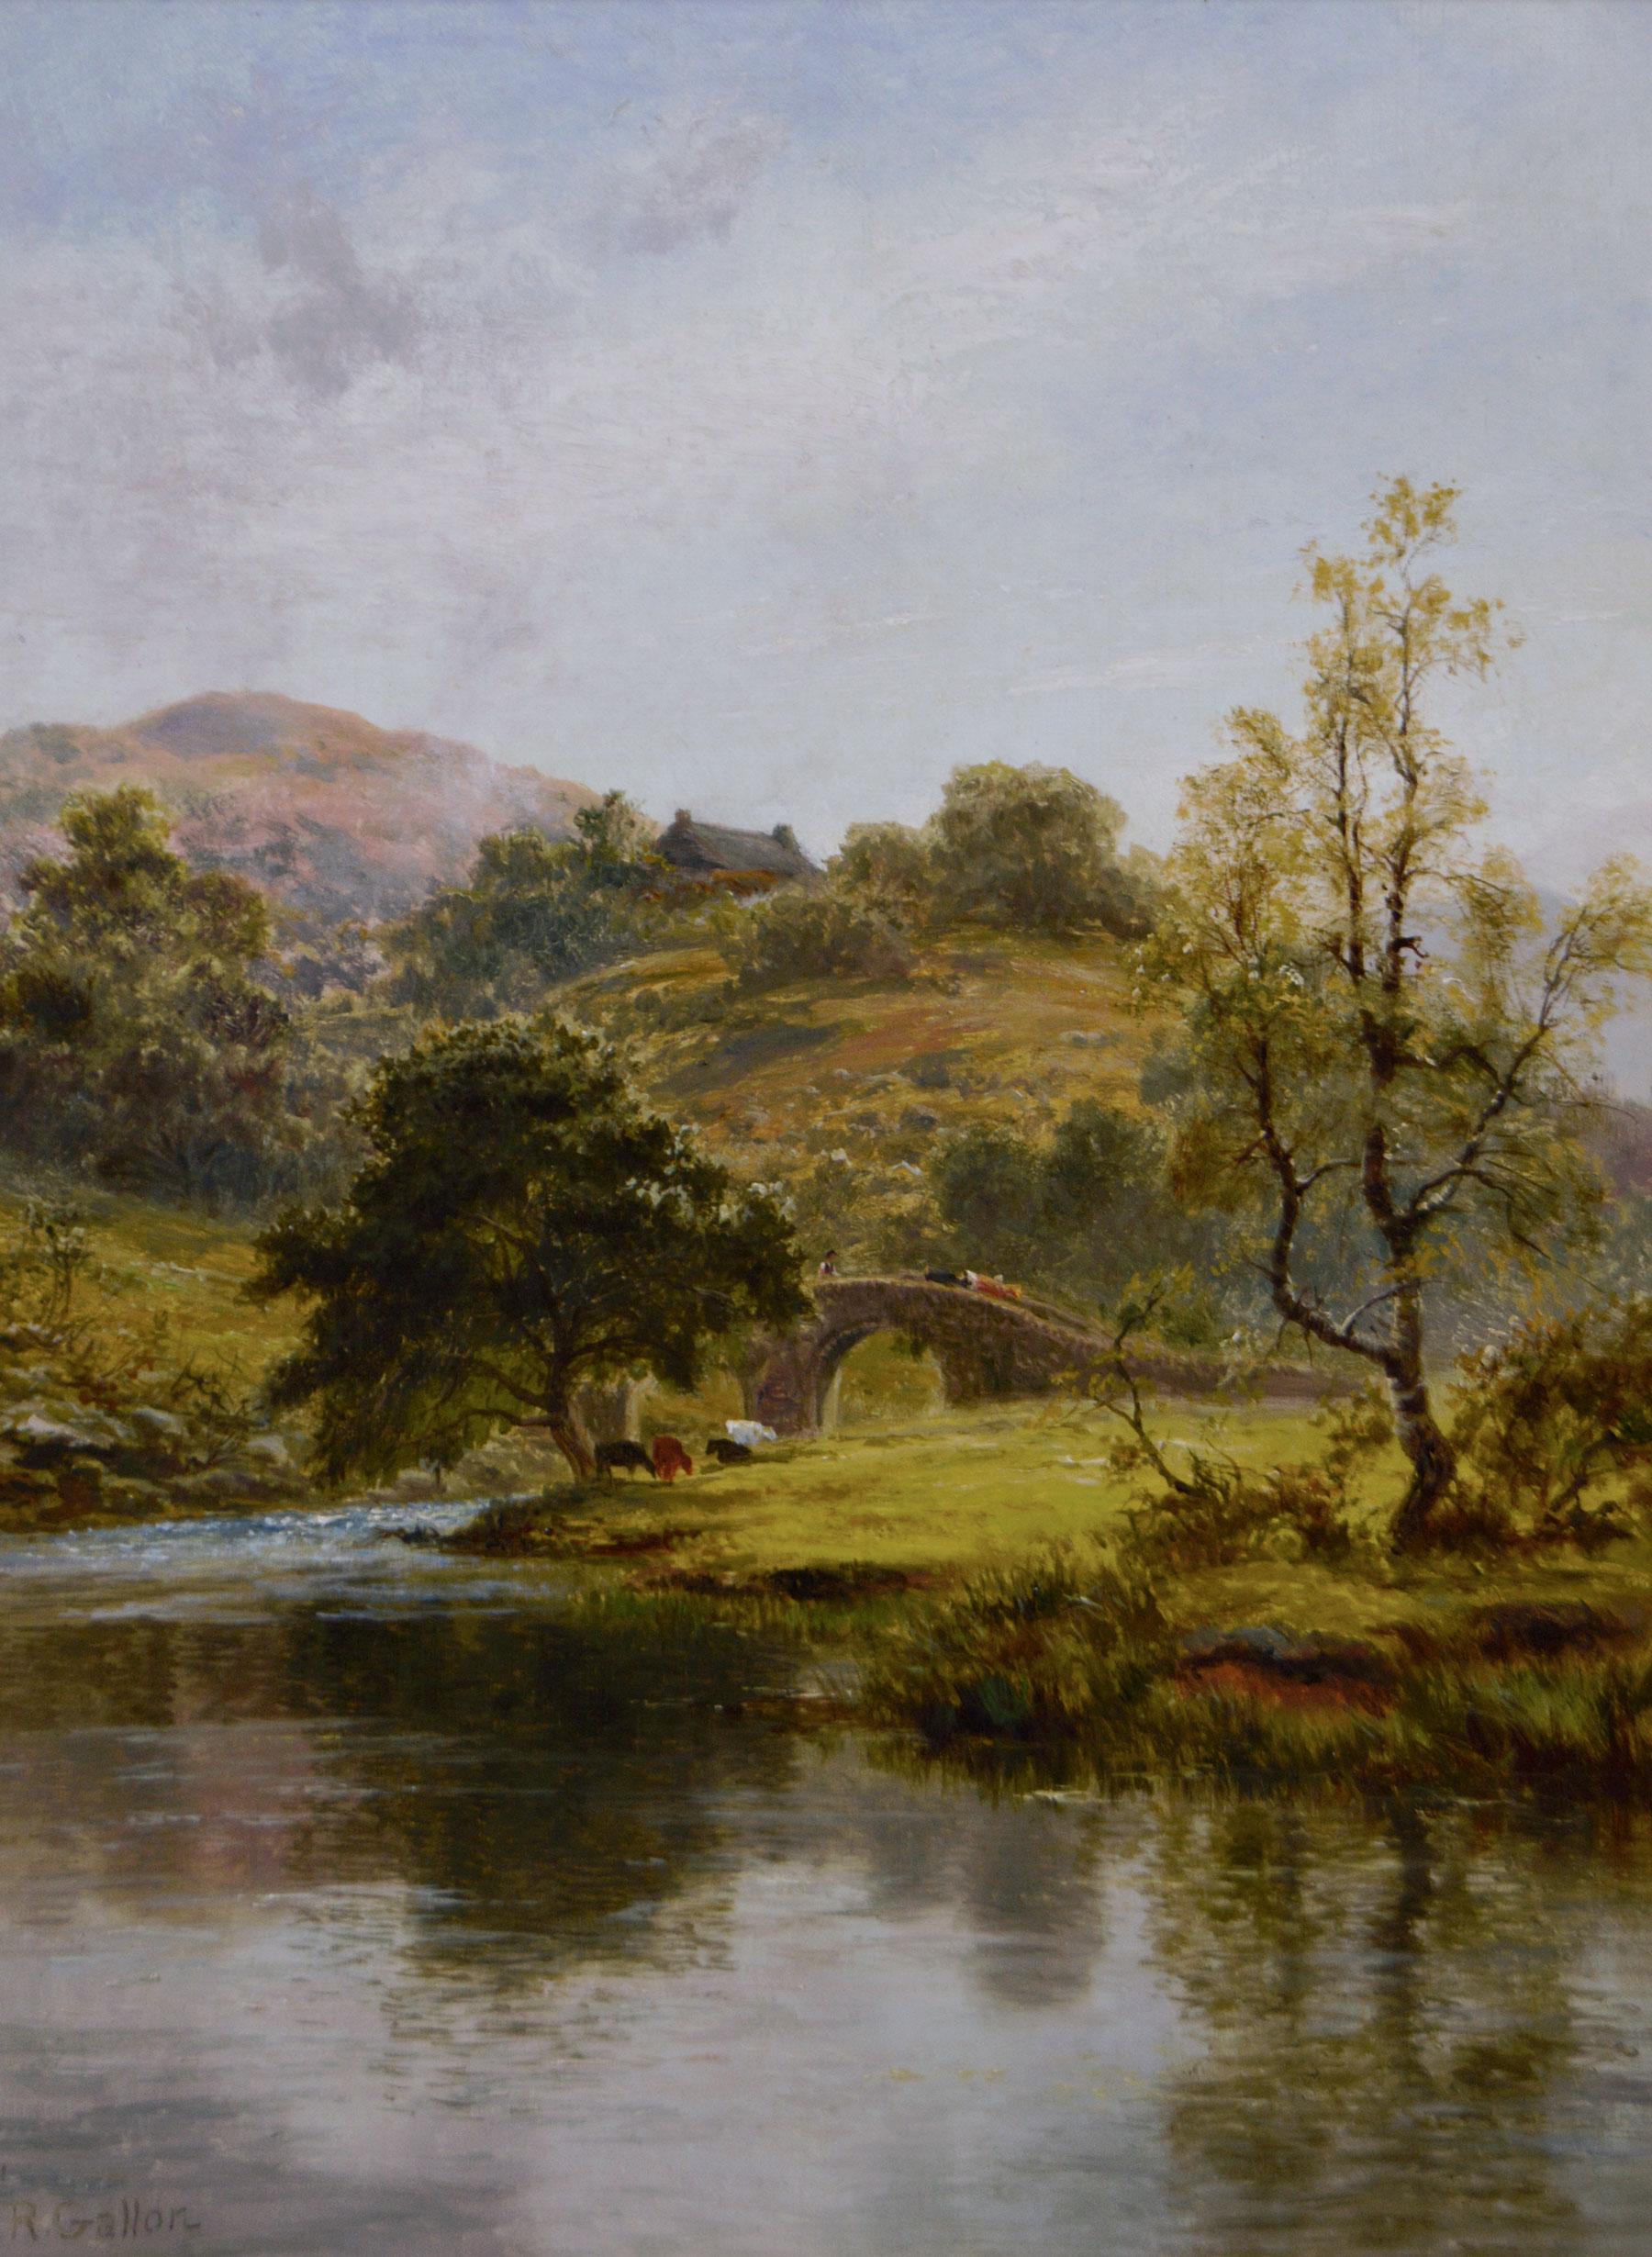 19th Century landscape oil painting of cattle at a river  - Painting by Robert Gallon